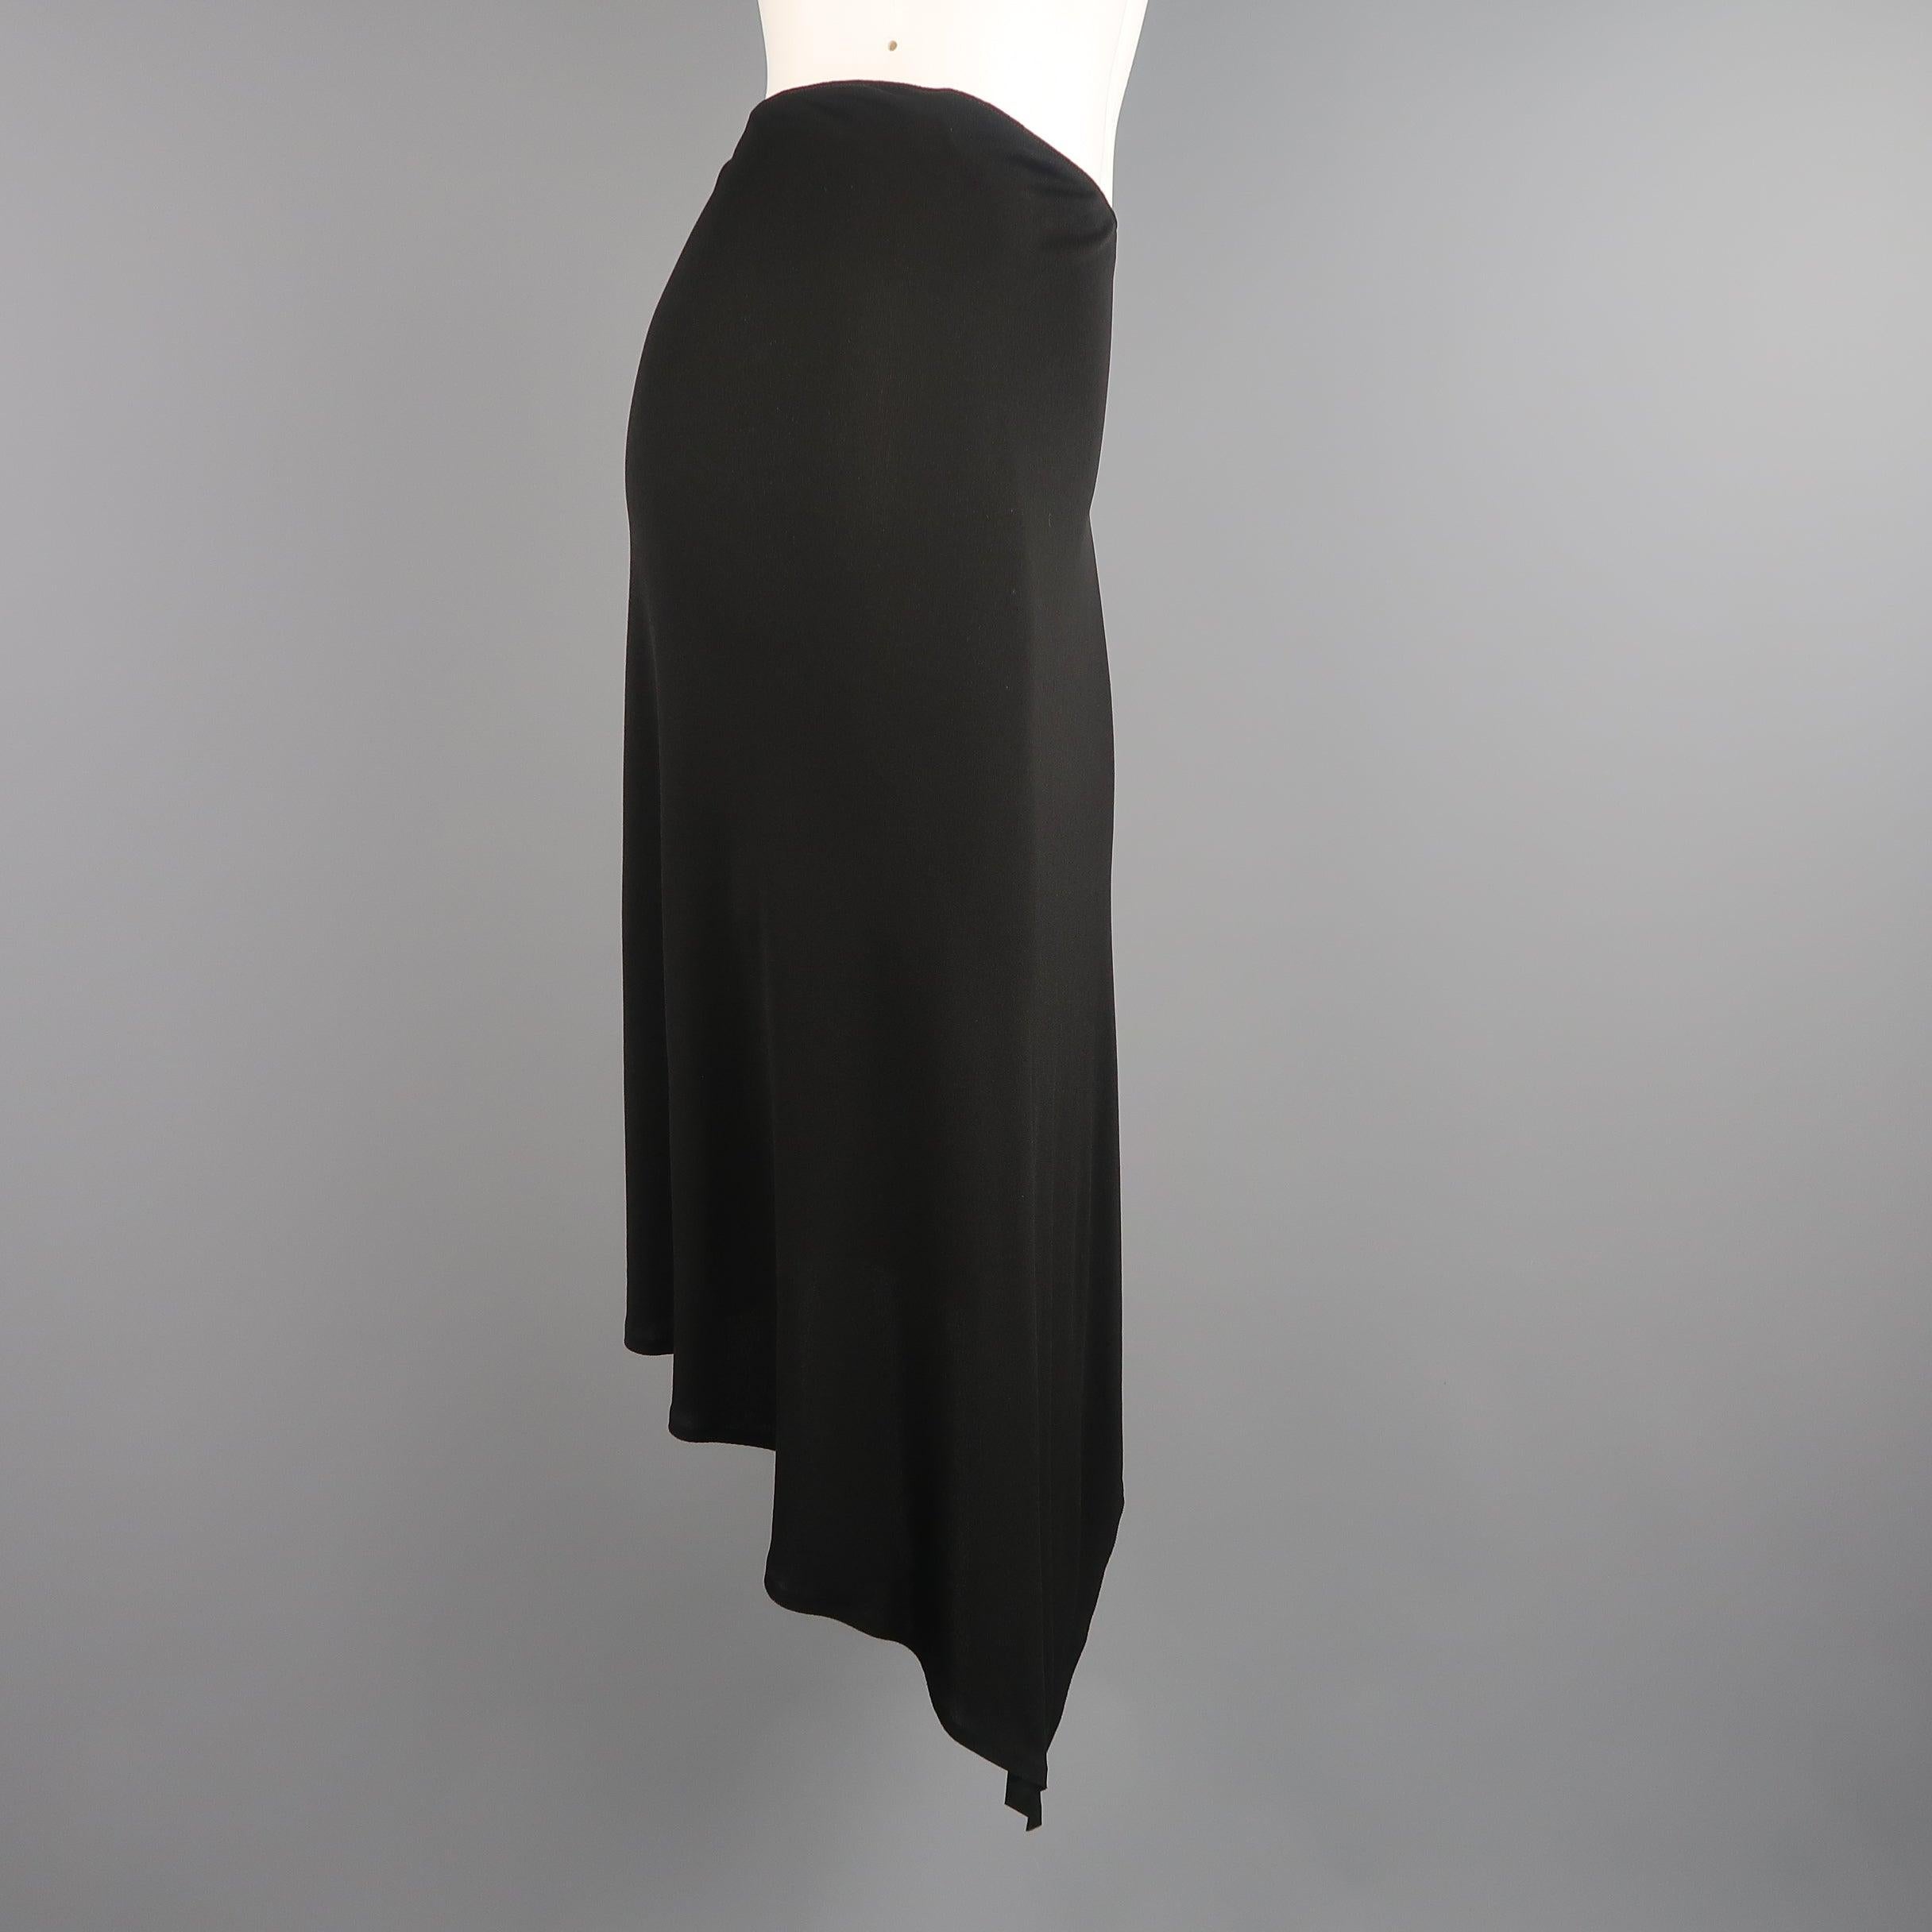 JEAN PAUL GAULTIER skirt comes in a semi sheer rayon material and features an A line silhouette and asymmetrical pointed front, short back hem line. 
Made in Italy.
Excellent Pre-Owned Condition.
 

Marked:   10
 

Measurements: 
  
l	Waist: 30